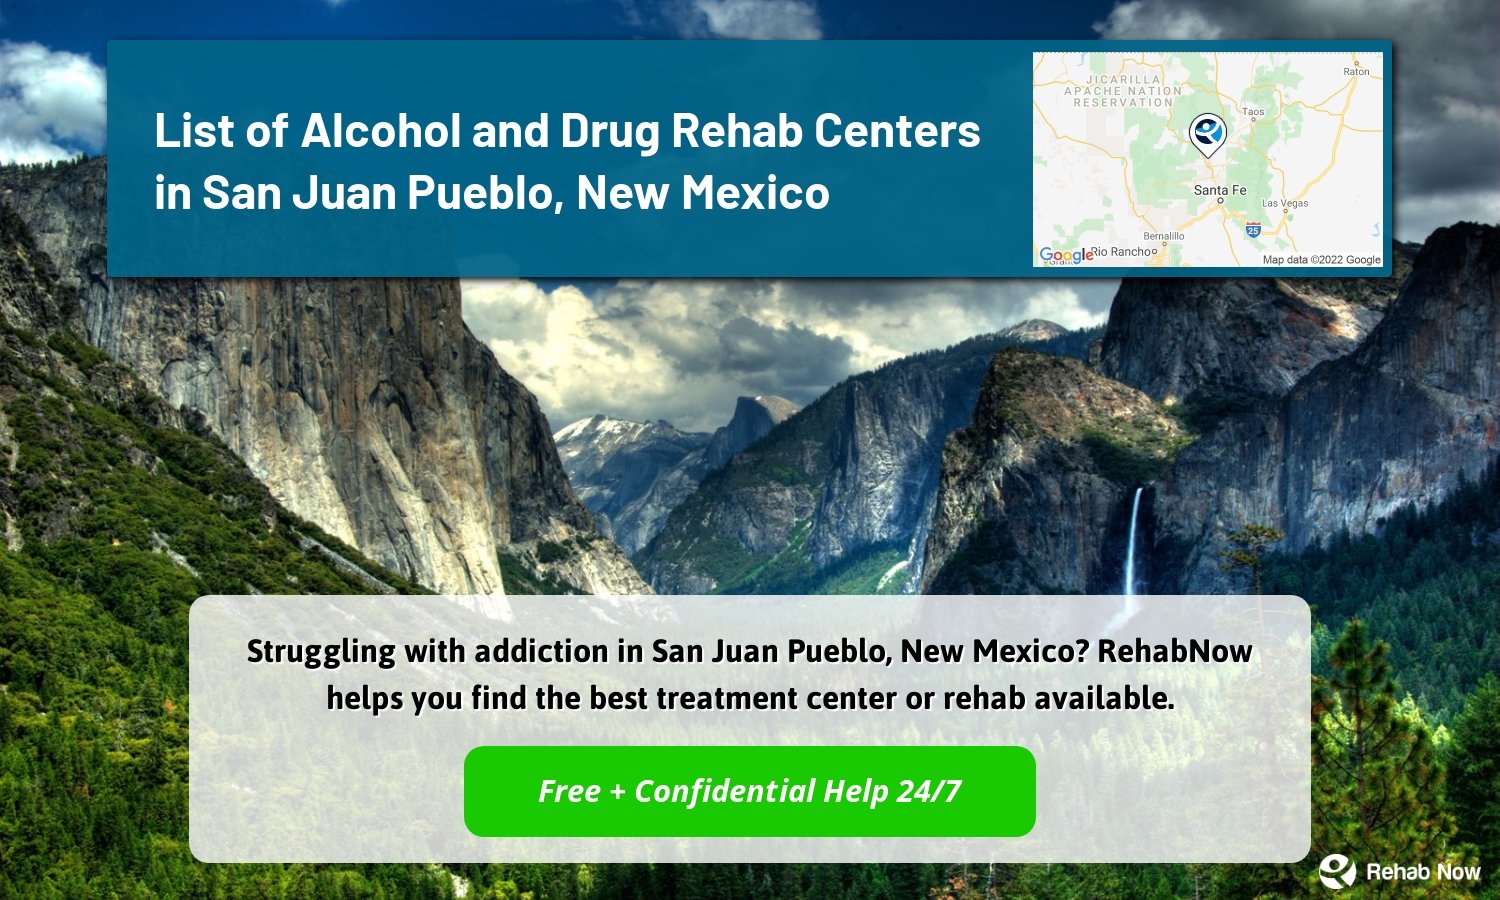 Struggling with addiction in San Juan Pueblo, New Mexico? RehabNow helps you find the best treatment center or rehab available.